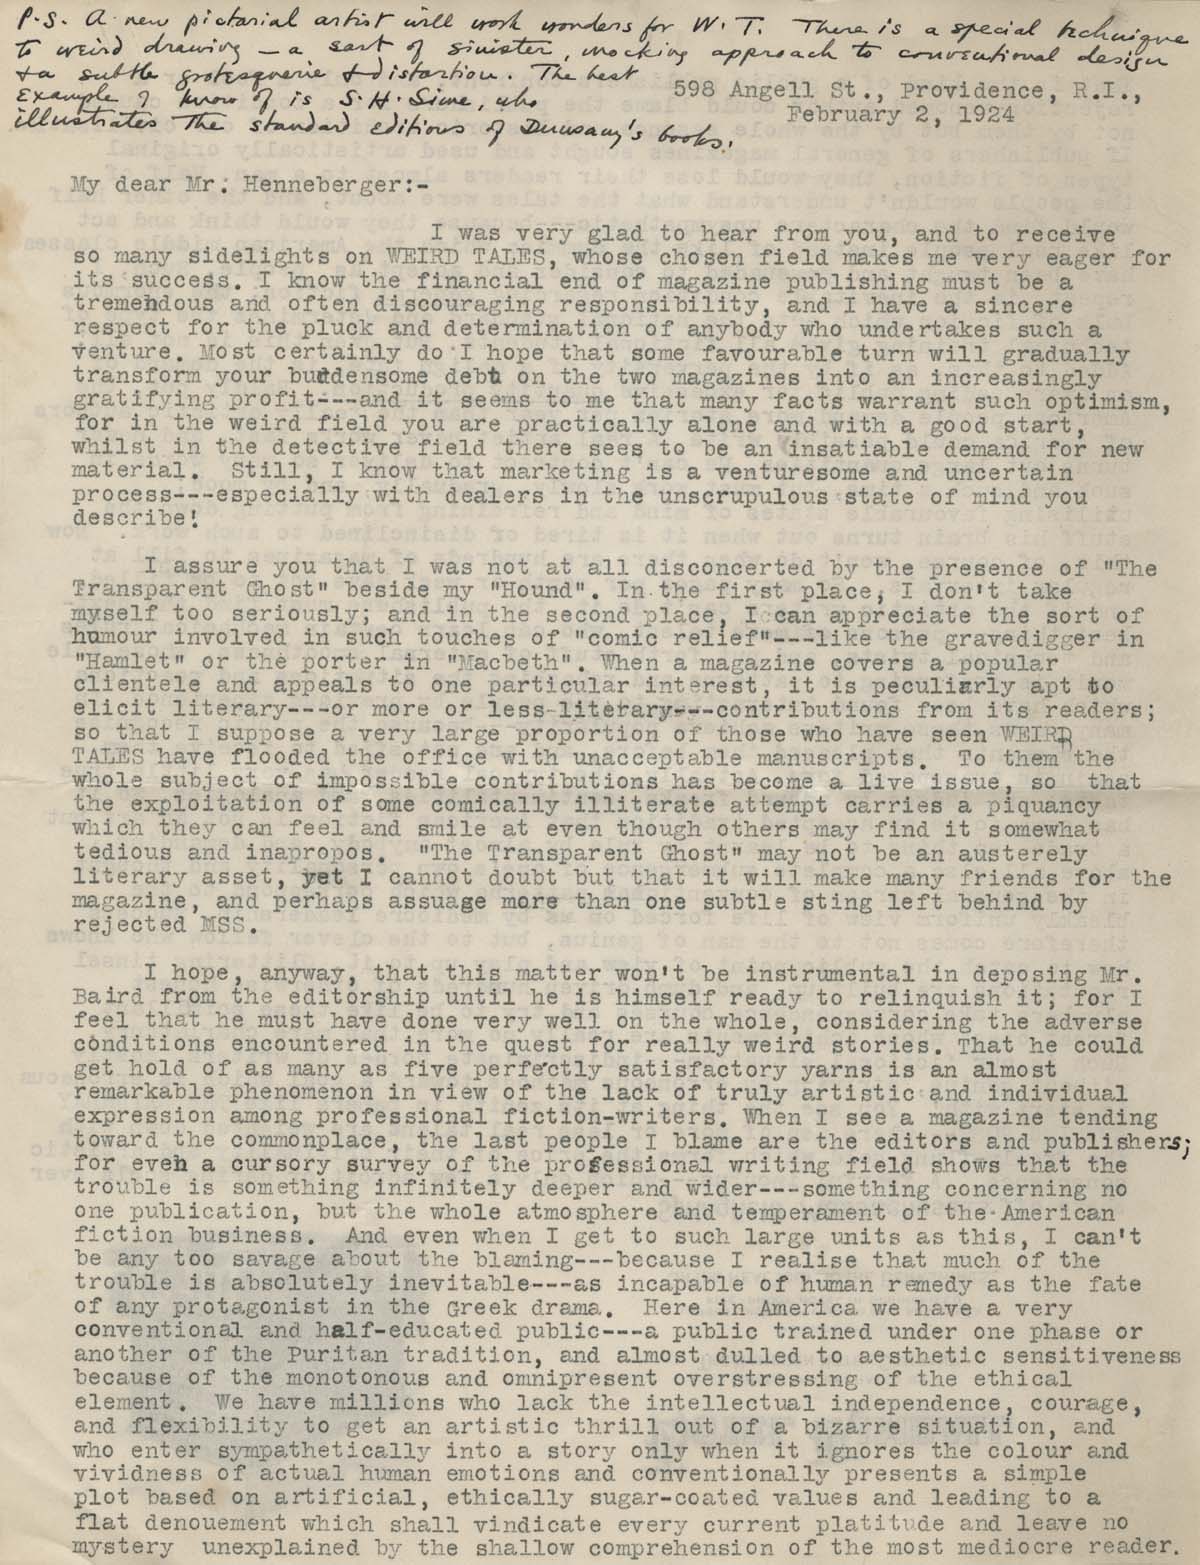 Fellows Find: H. P. Lovecraft letter sheds light on pivotal moment in his career